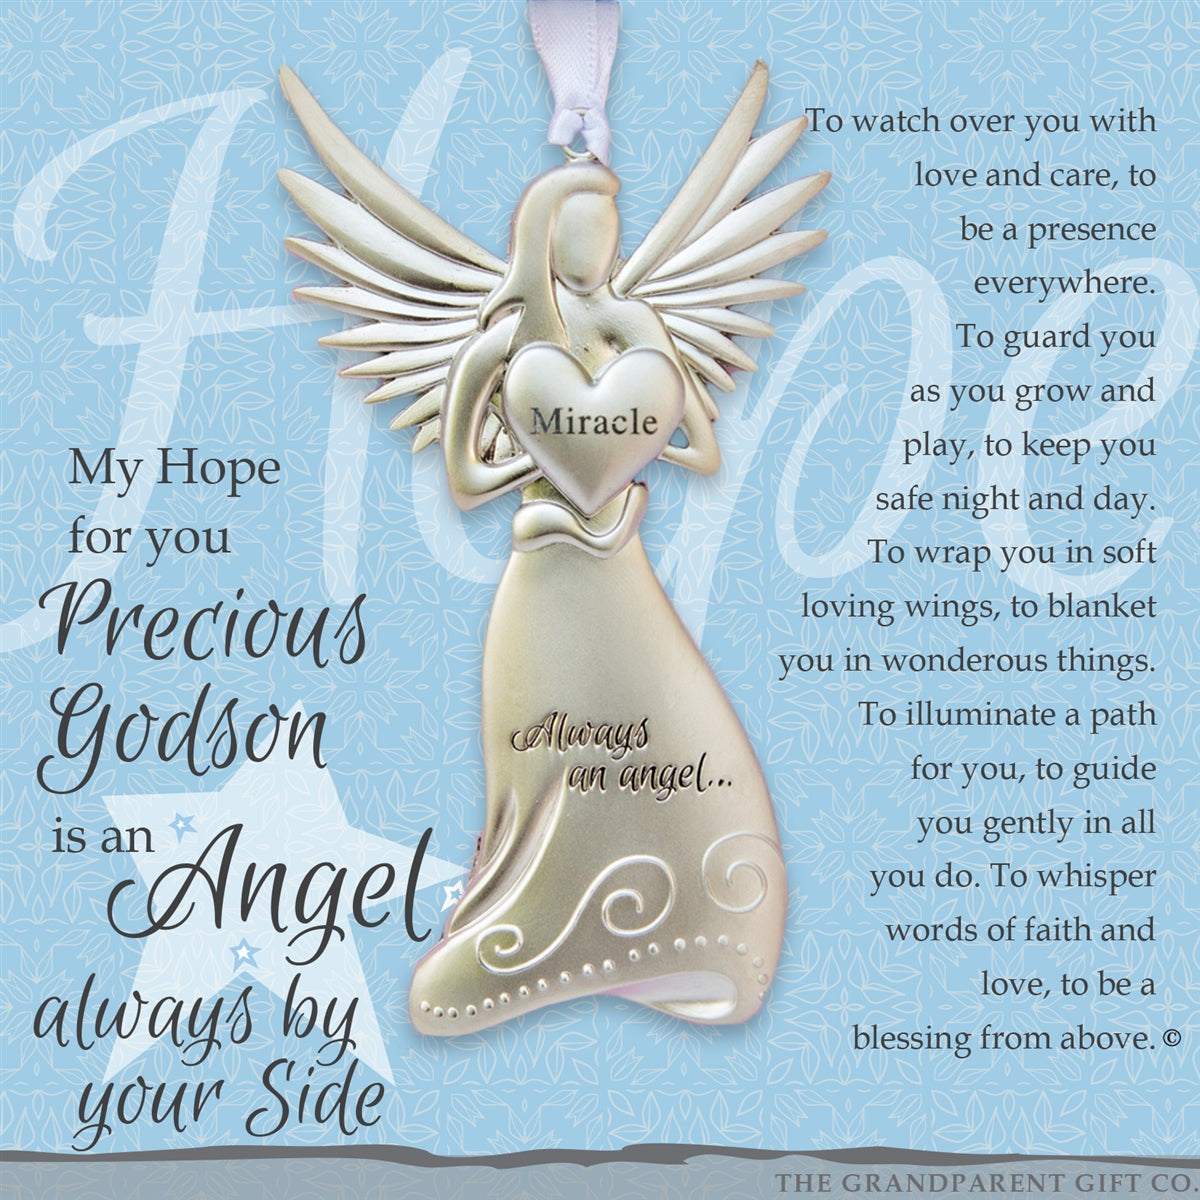 Godson Gift - 4" metal miracle angel ornament with "Precious Godson" poem in white box with clear lid.